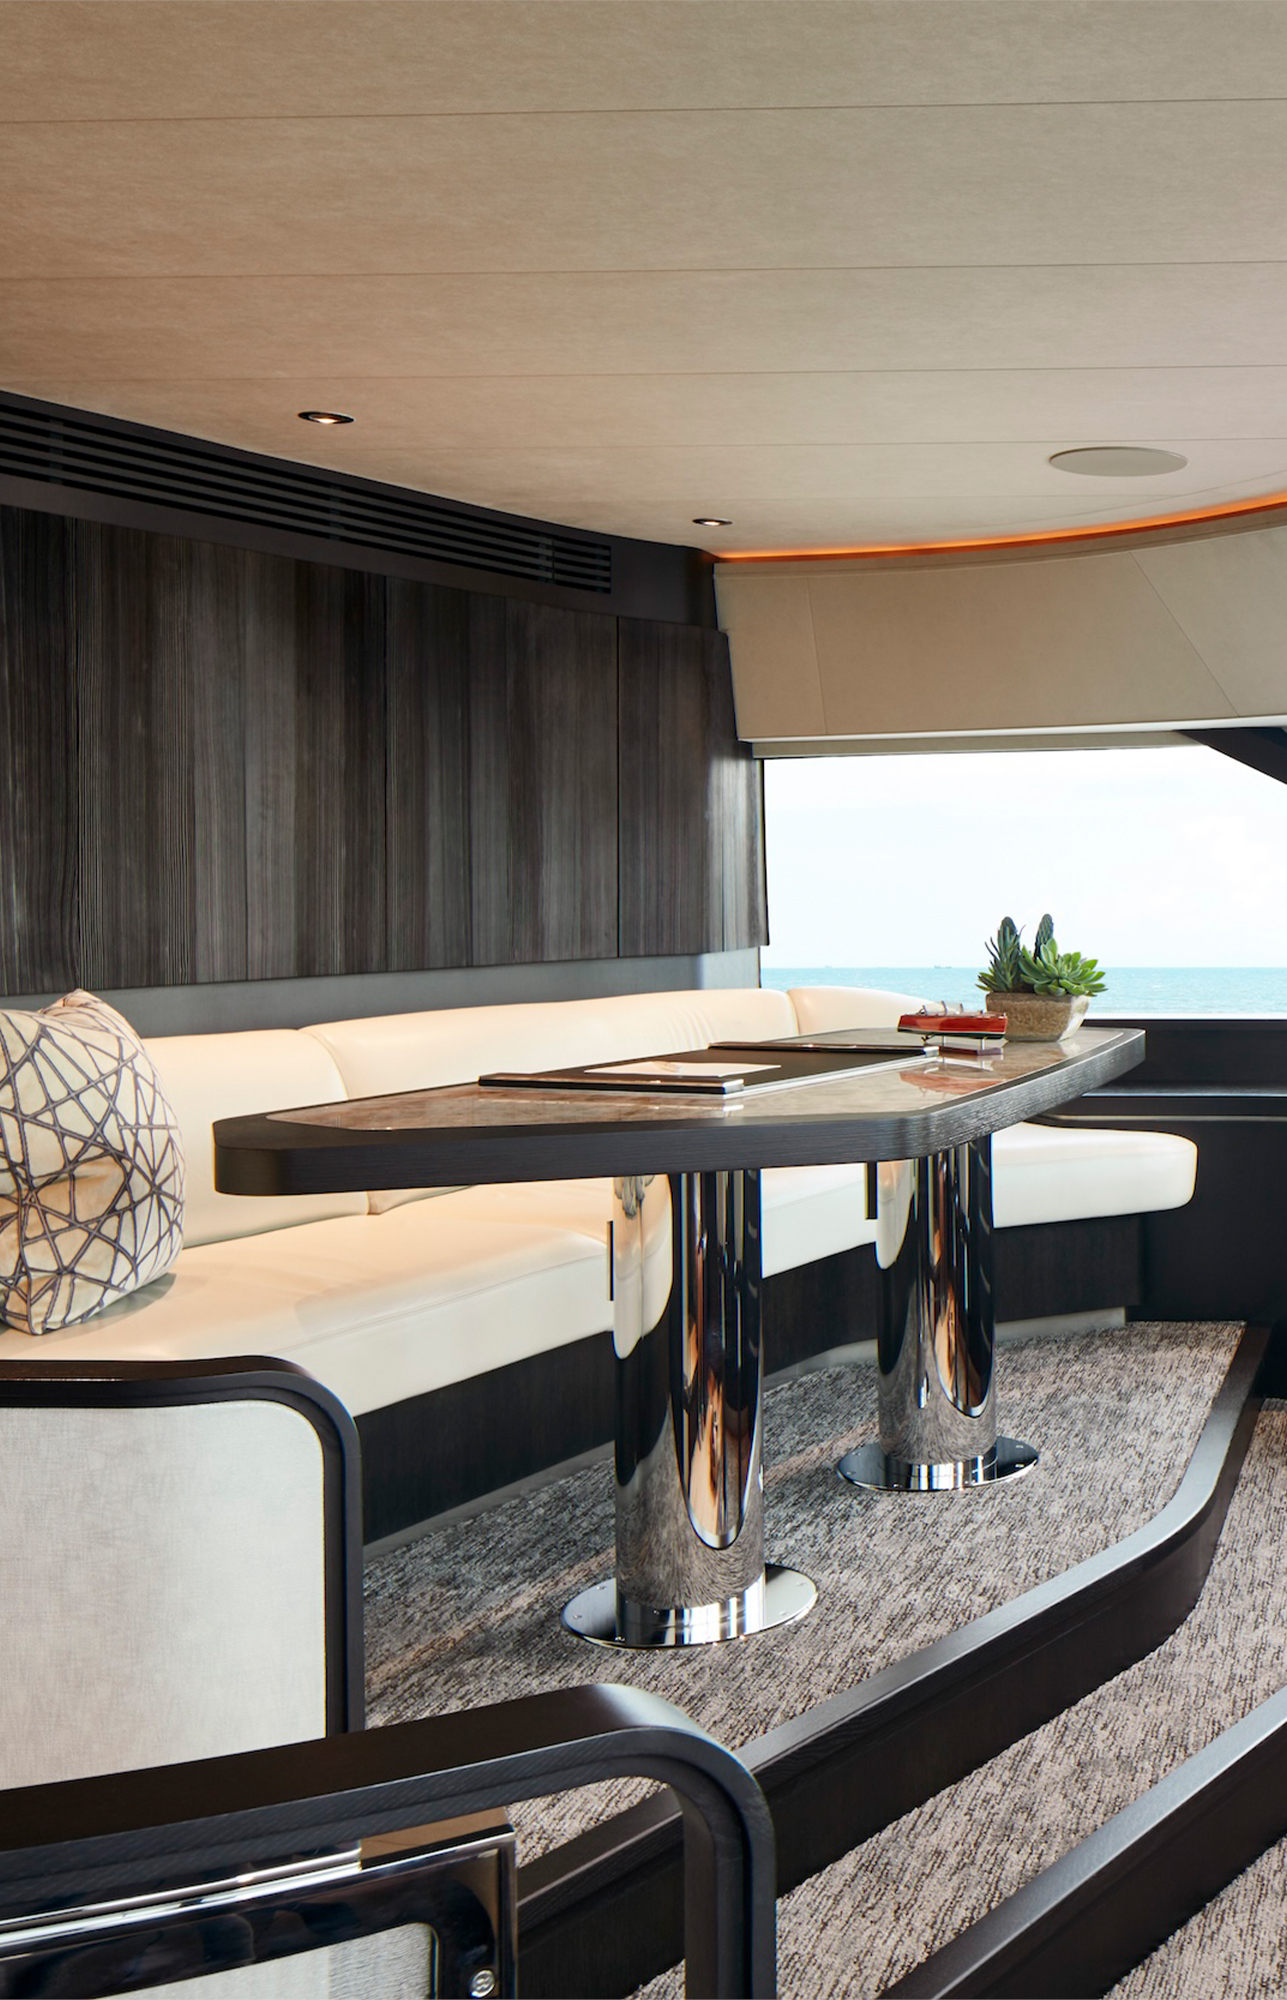 House-of-Hunt-Interior-Design-Chicago-Yacht-Captian-Area-Mobile